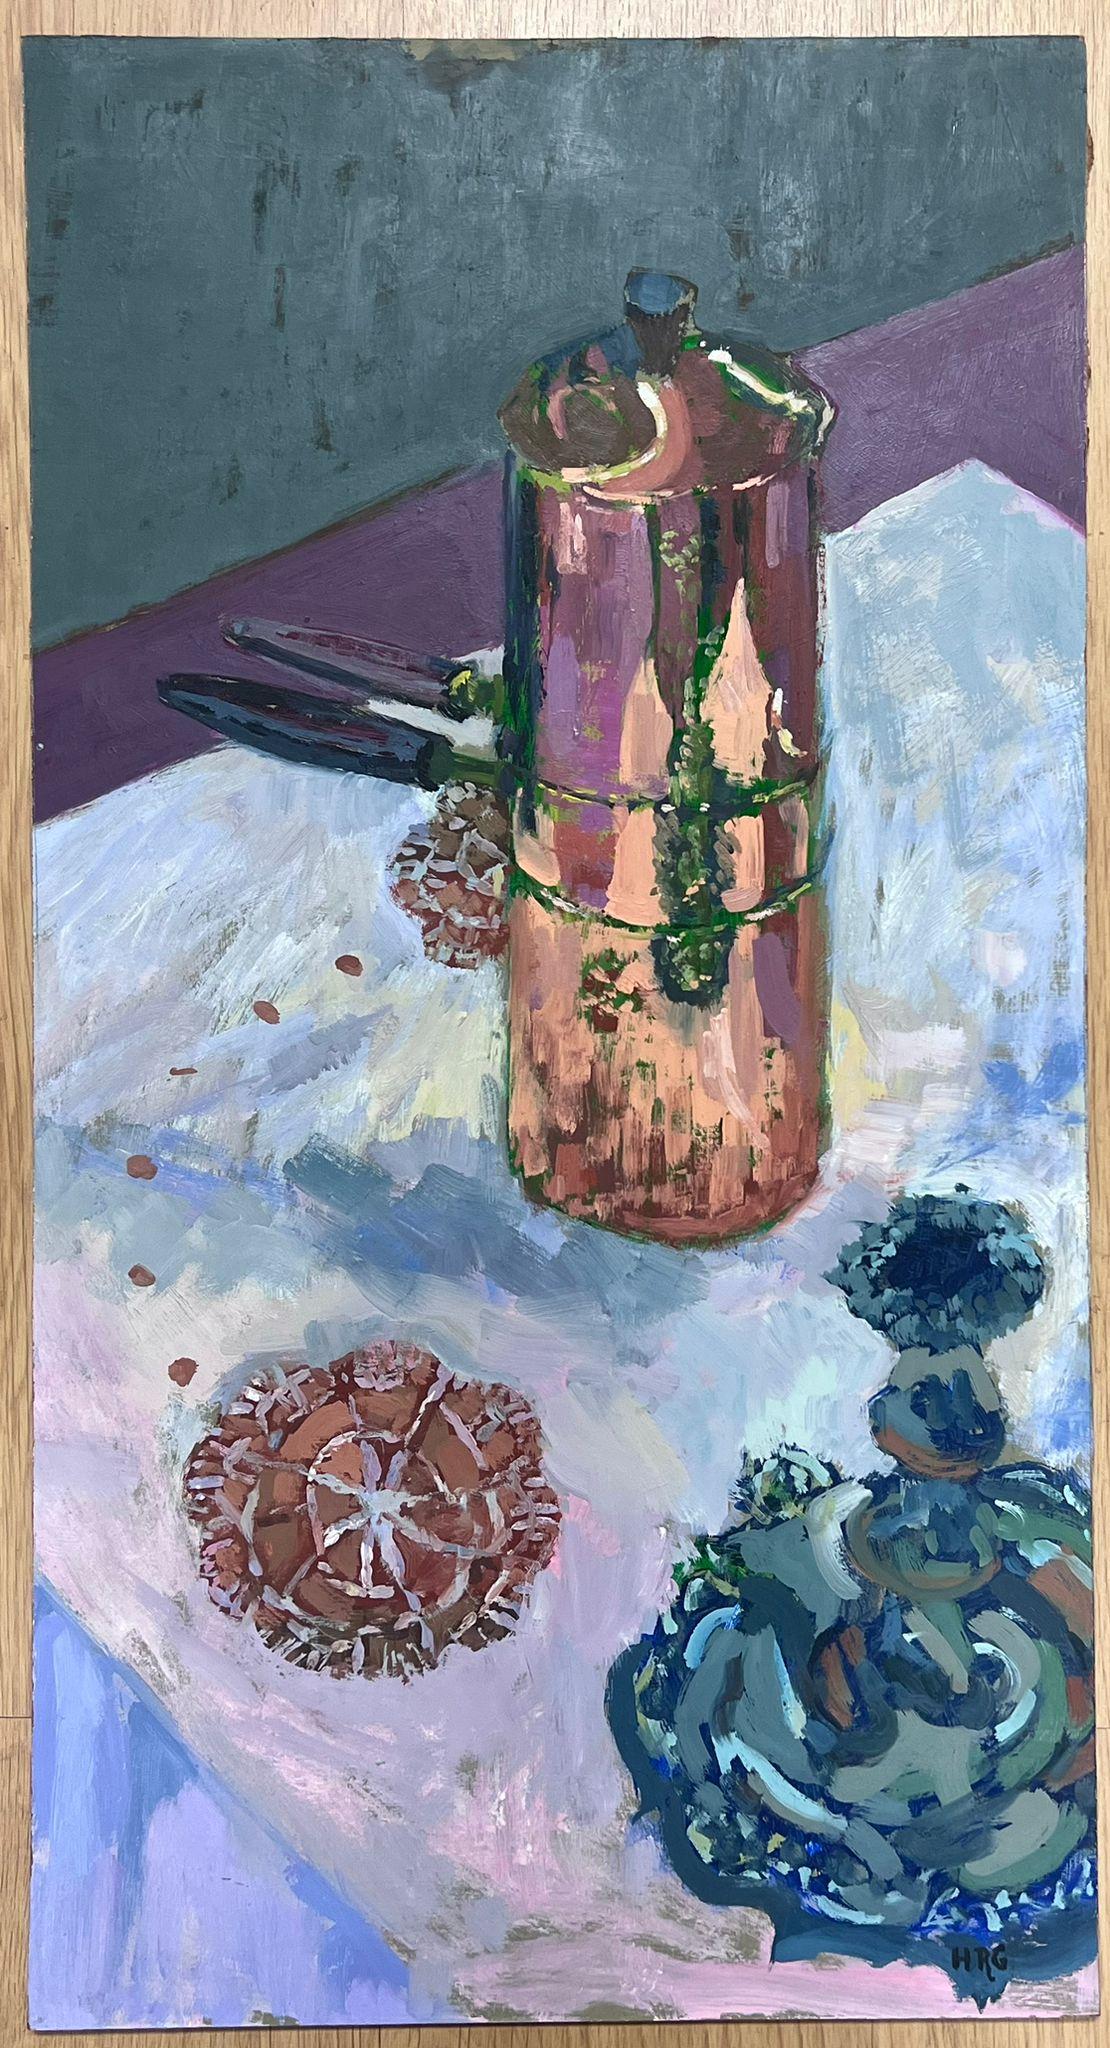 Table Interior
by Helen Greenfield (British 20th century) 
signed initials oil painting on board, unframed
board: 30 x 16 inches
condition: overall very good
provenance: all the paintings we have by this artist have come from their studio sale in